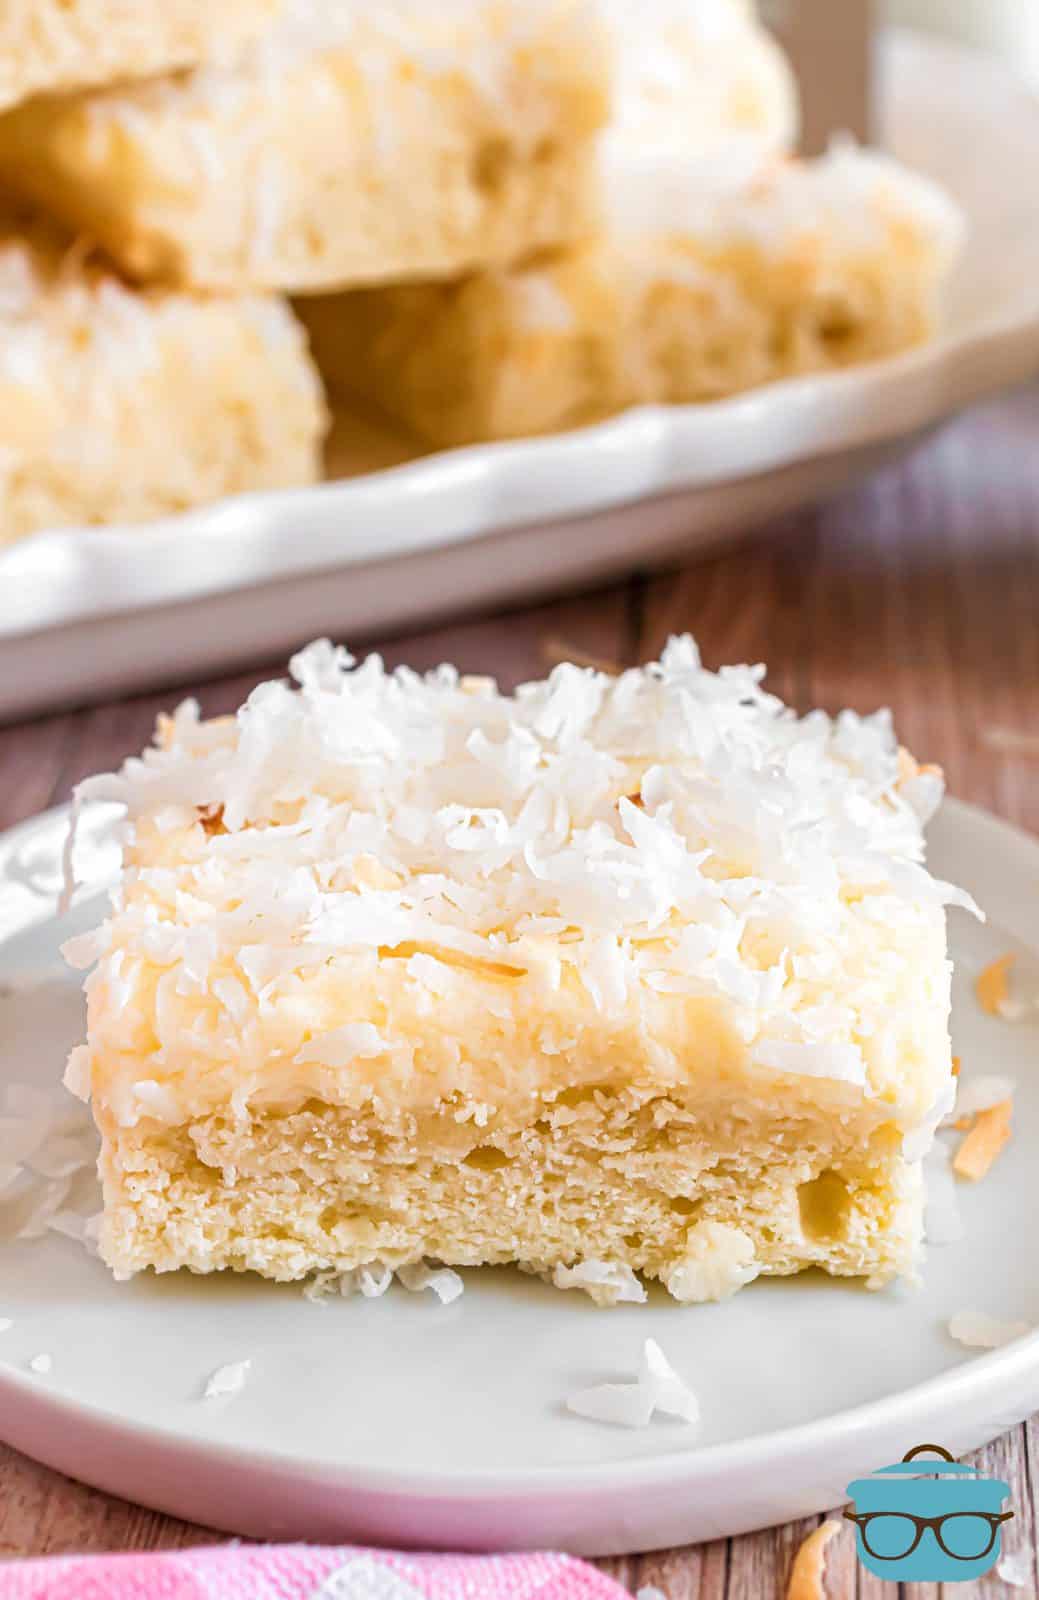 One of the Frosted Coconut Sugar Cookie Bars on a white plate.